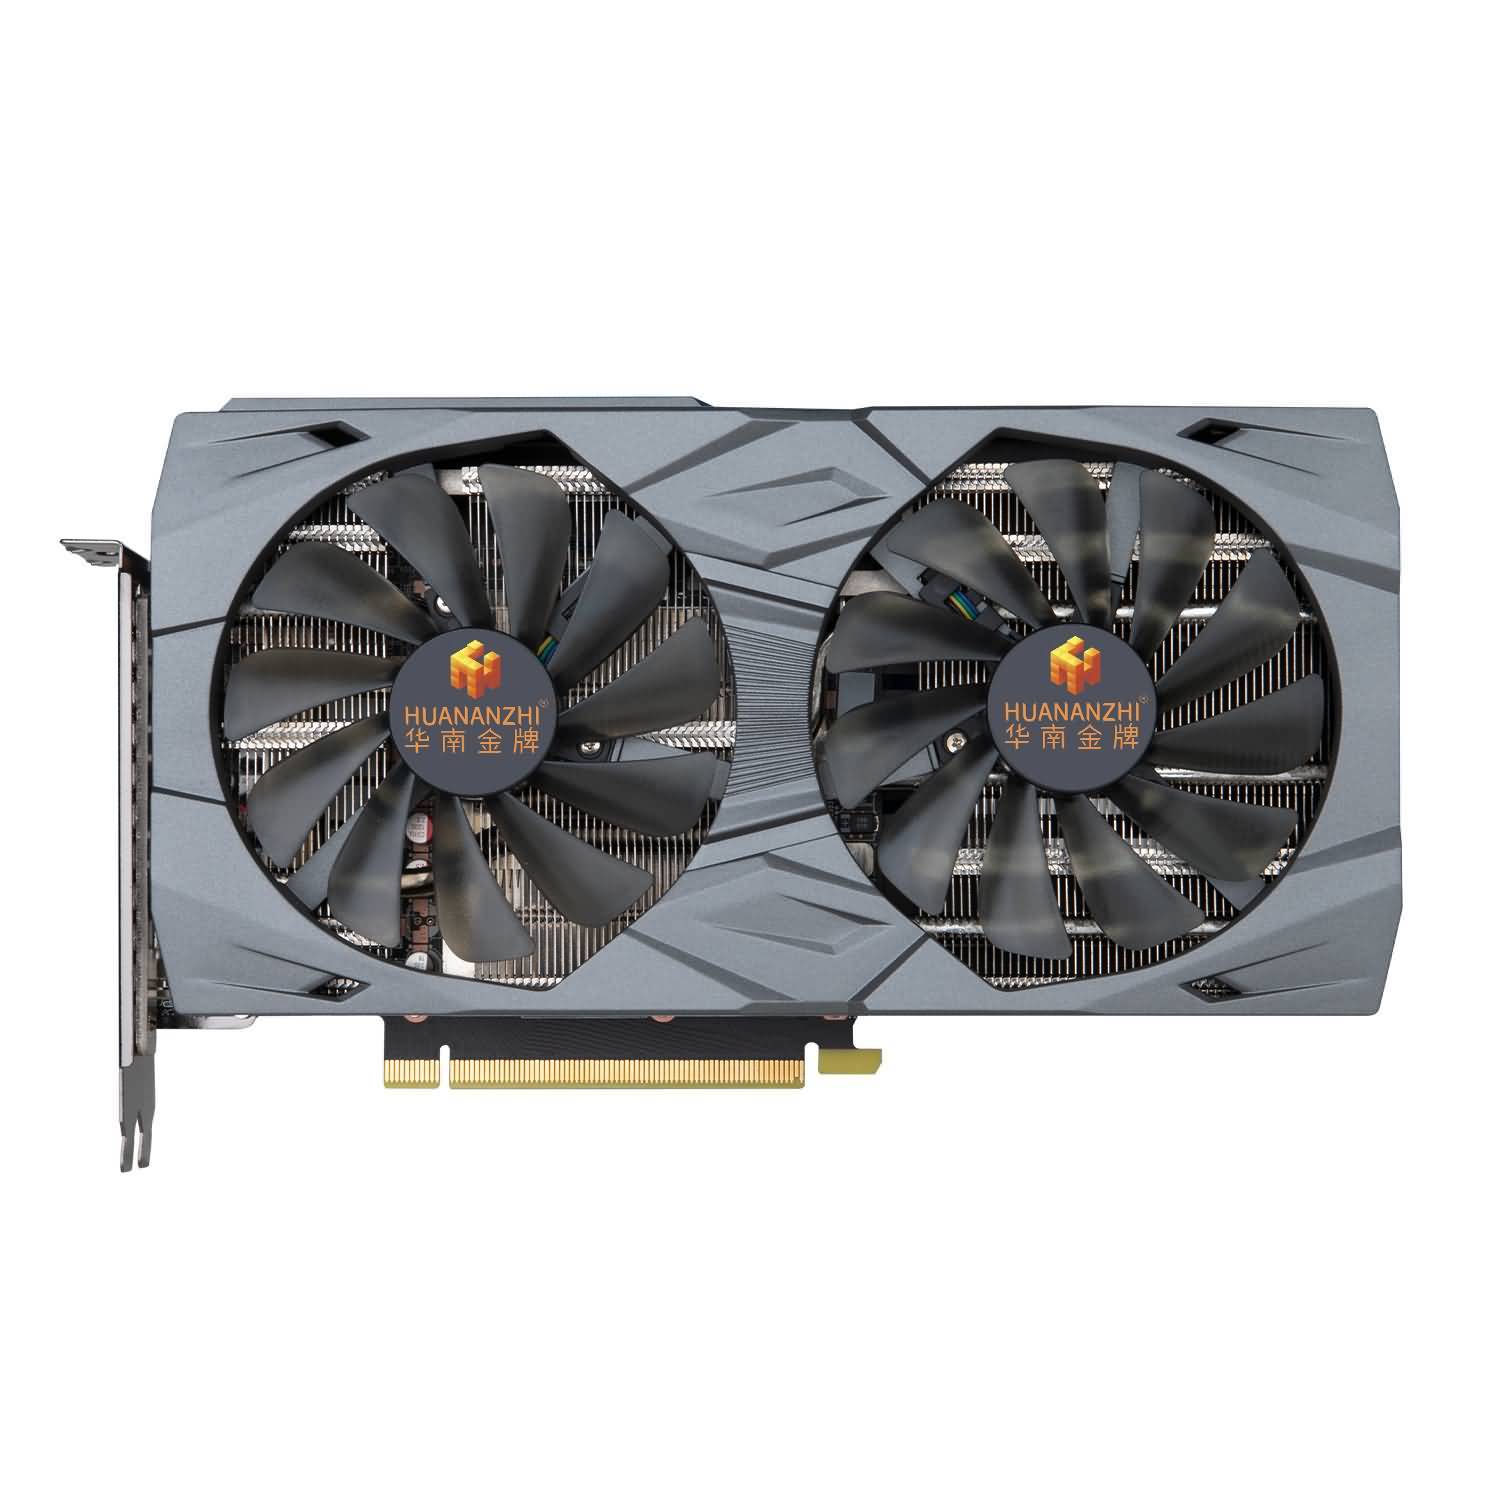 Download Huananzhi RTX3060 12G Graphics Card Free